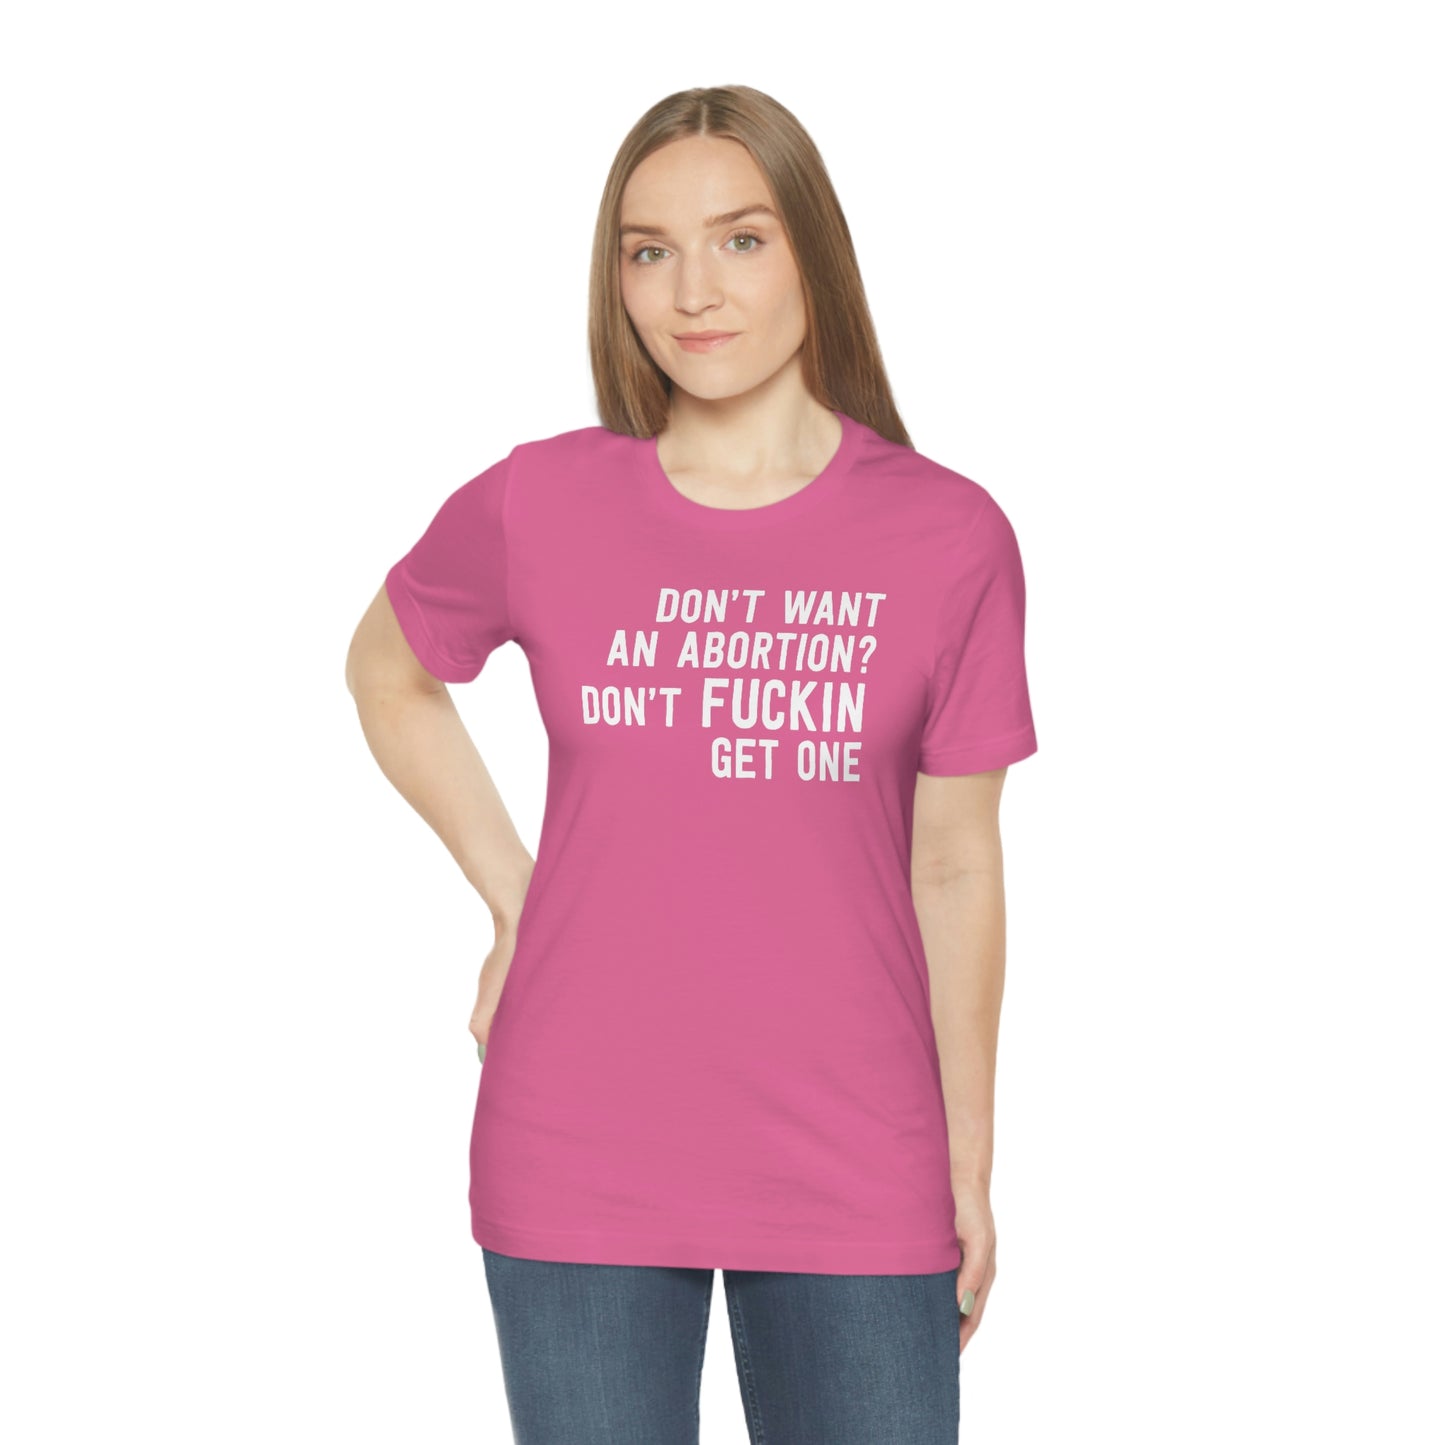 Don't want an abortion? Don't fucking get one T-Shirt in Pink - Female Model